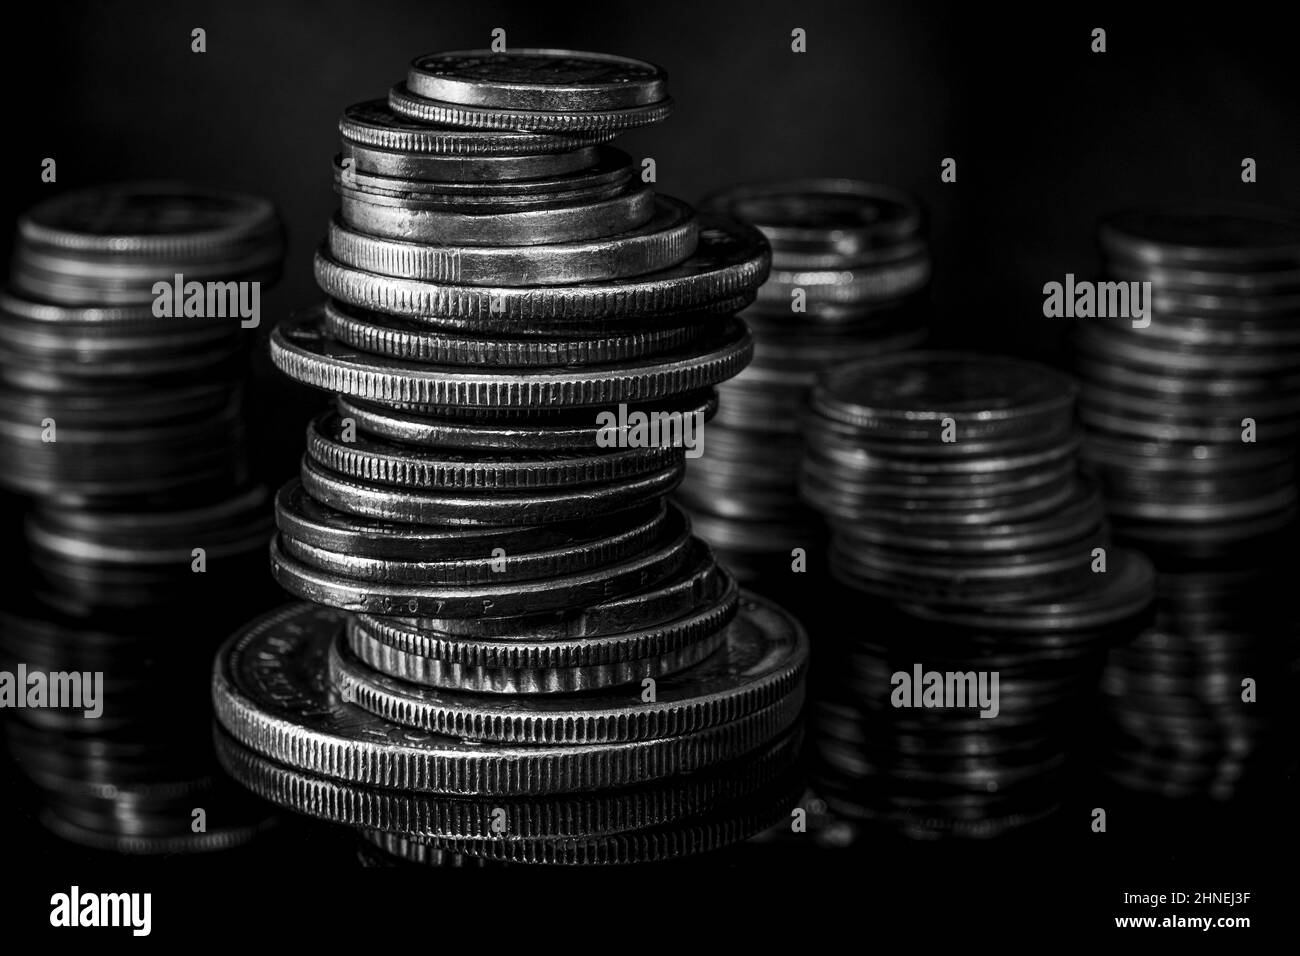 Stacks of Coins Euro Dollar Blurred Background Dramatic Light Black and White Stock Photo